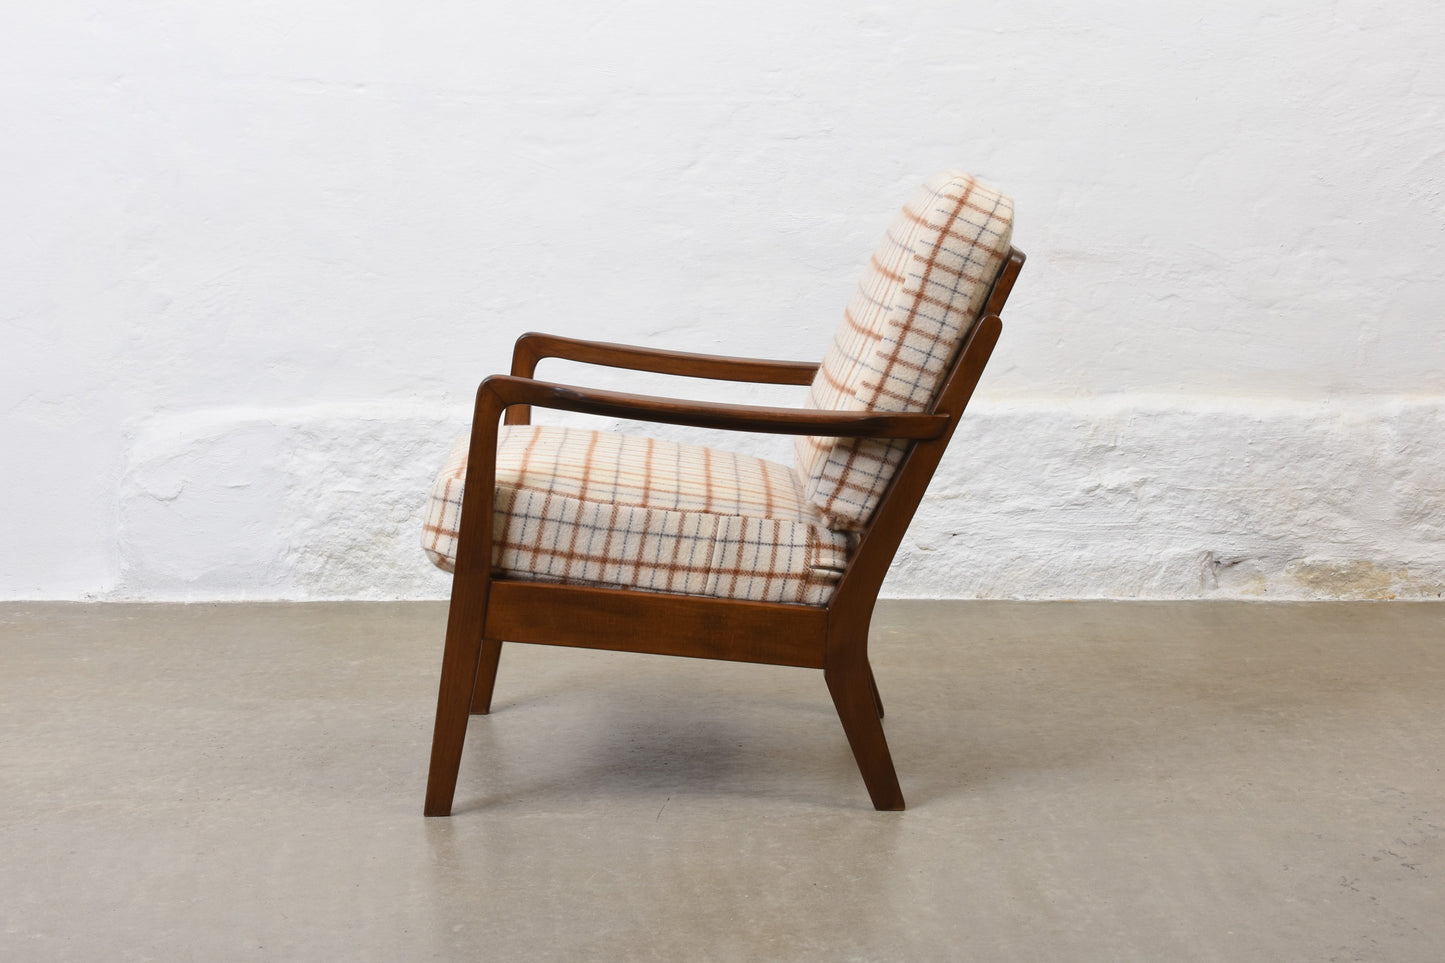 Newly reupholstered: 1950s beech lounger in striped wool